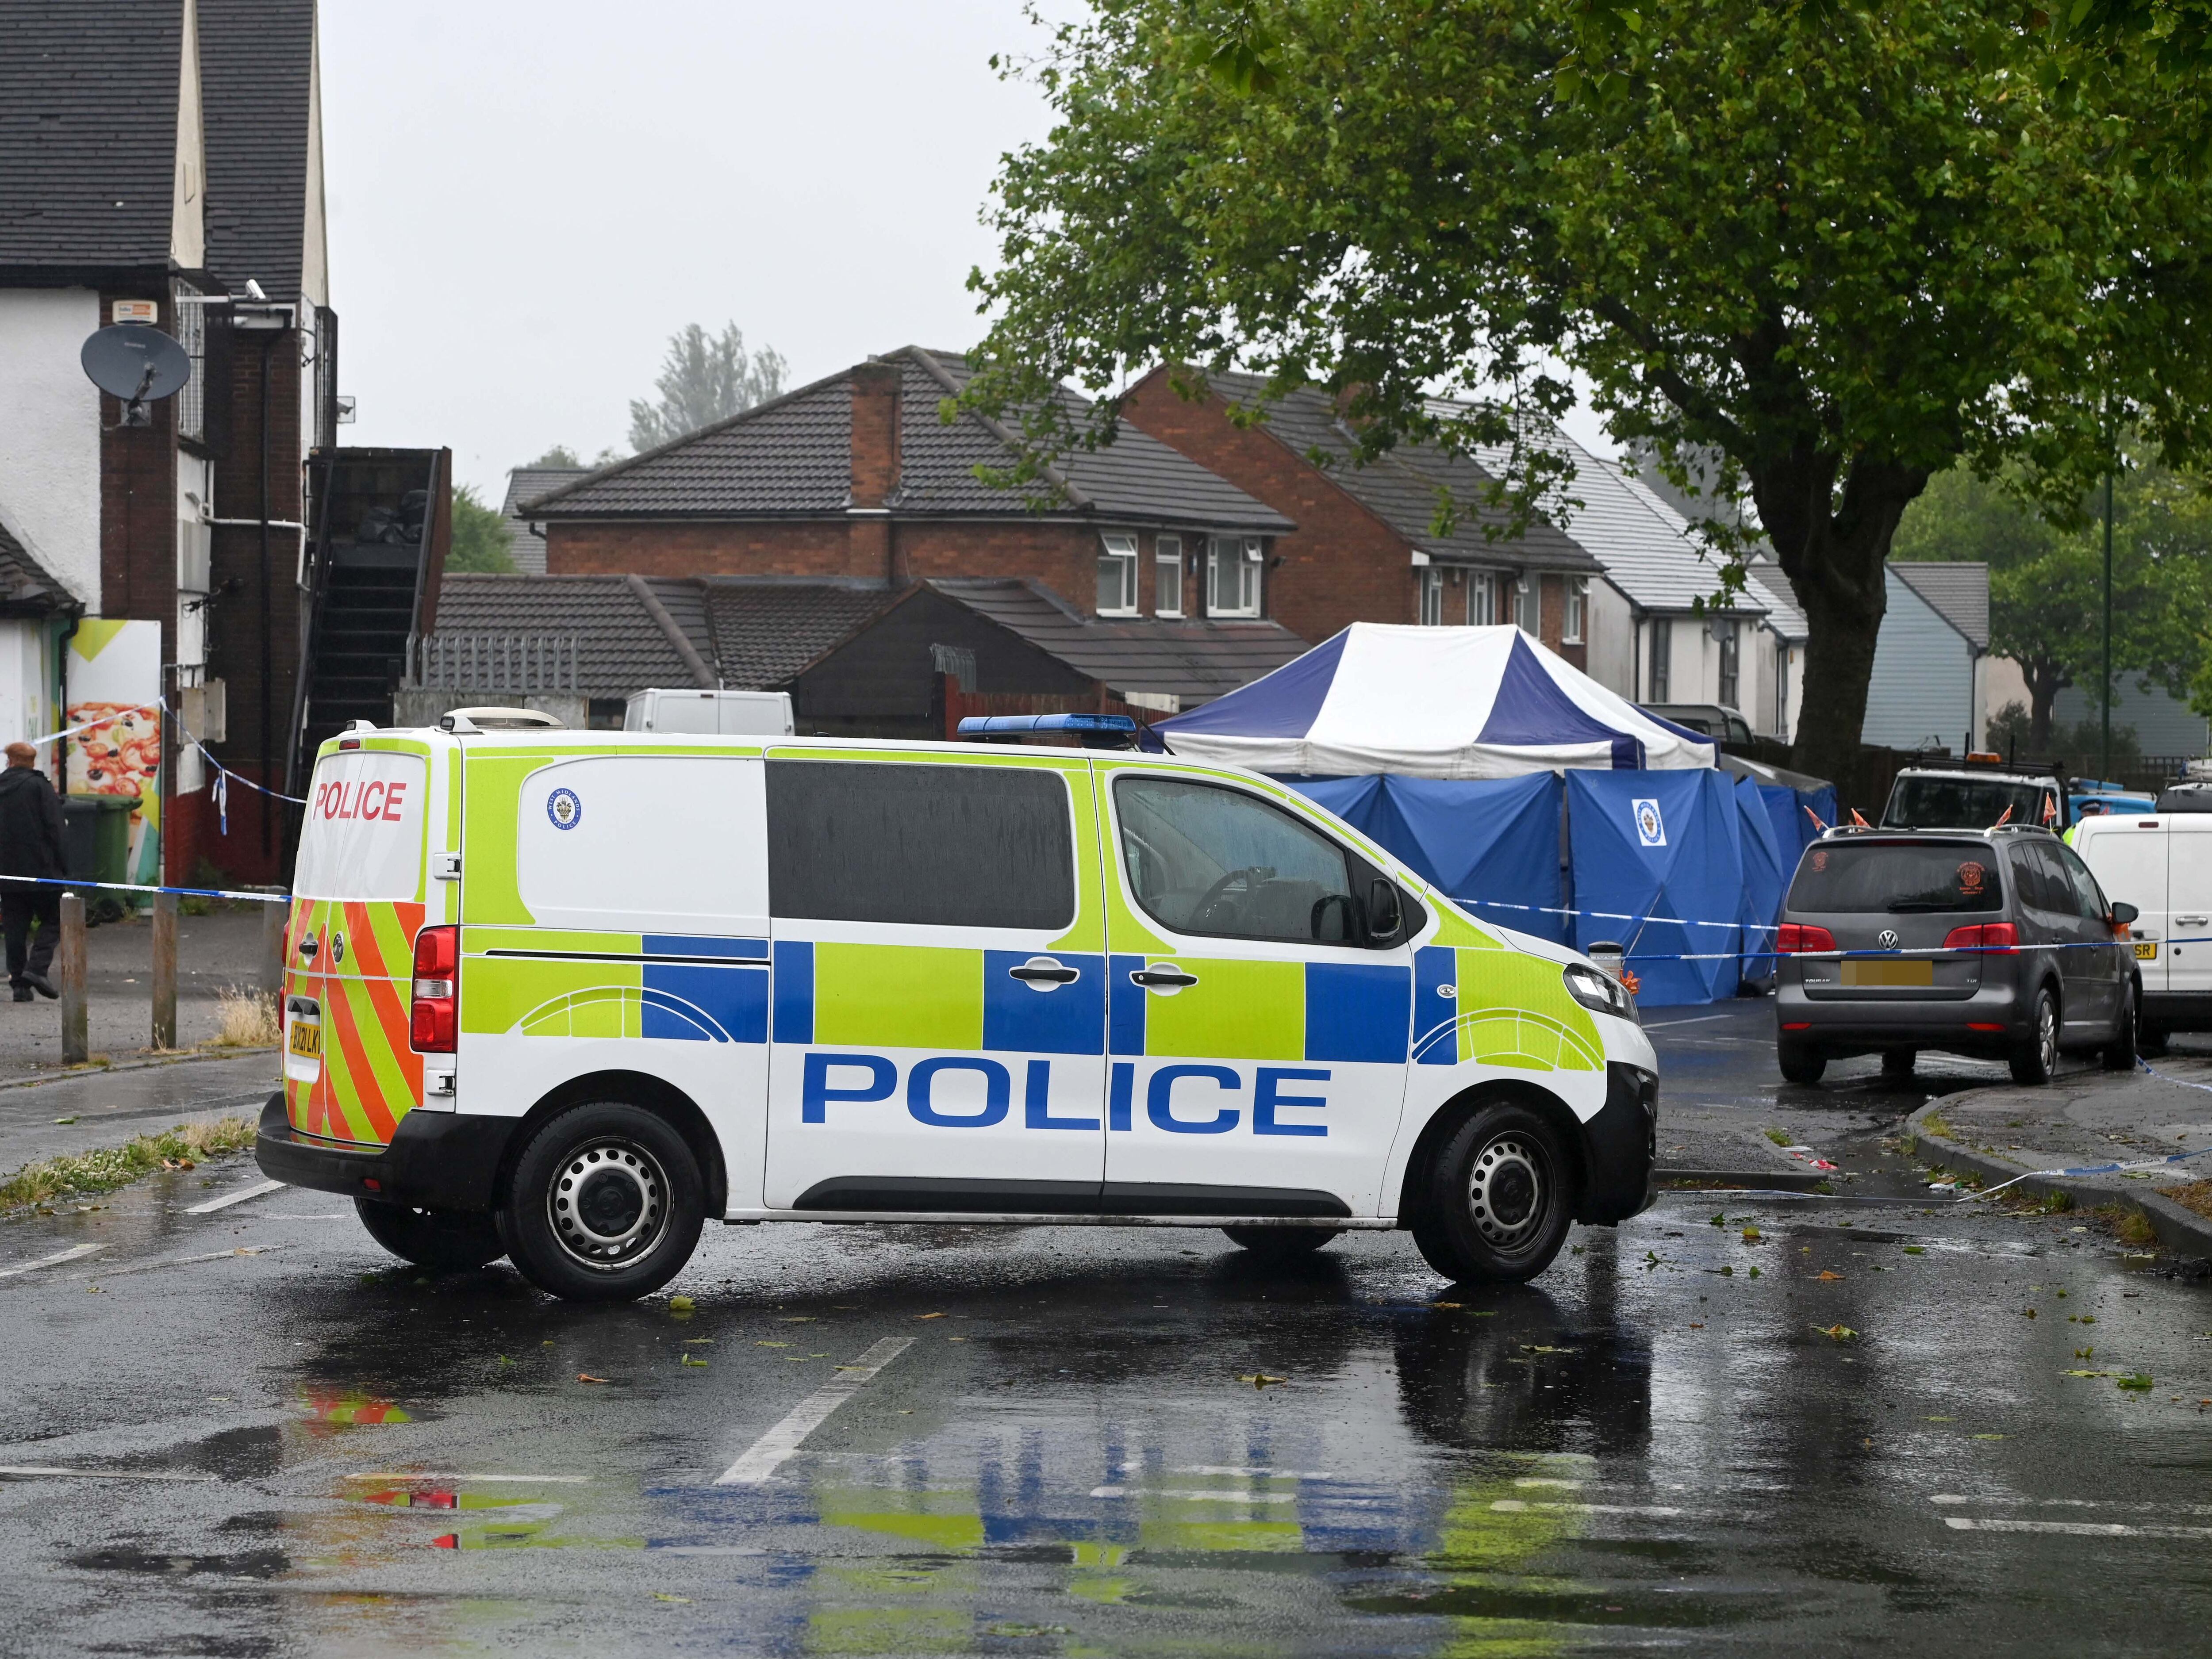 'I worry about what could happen next': Walsall residents fearful after man shot dead in street